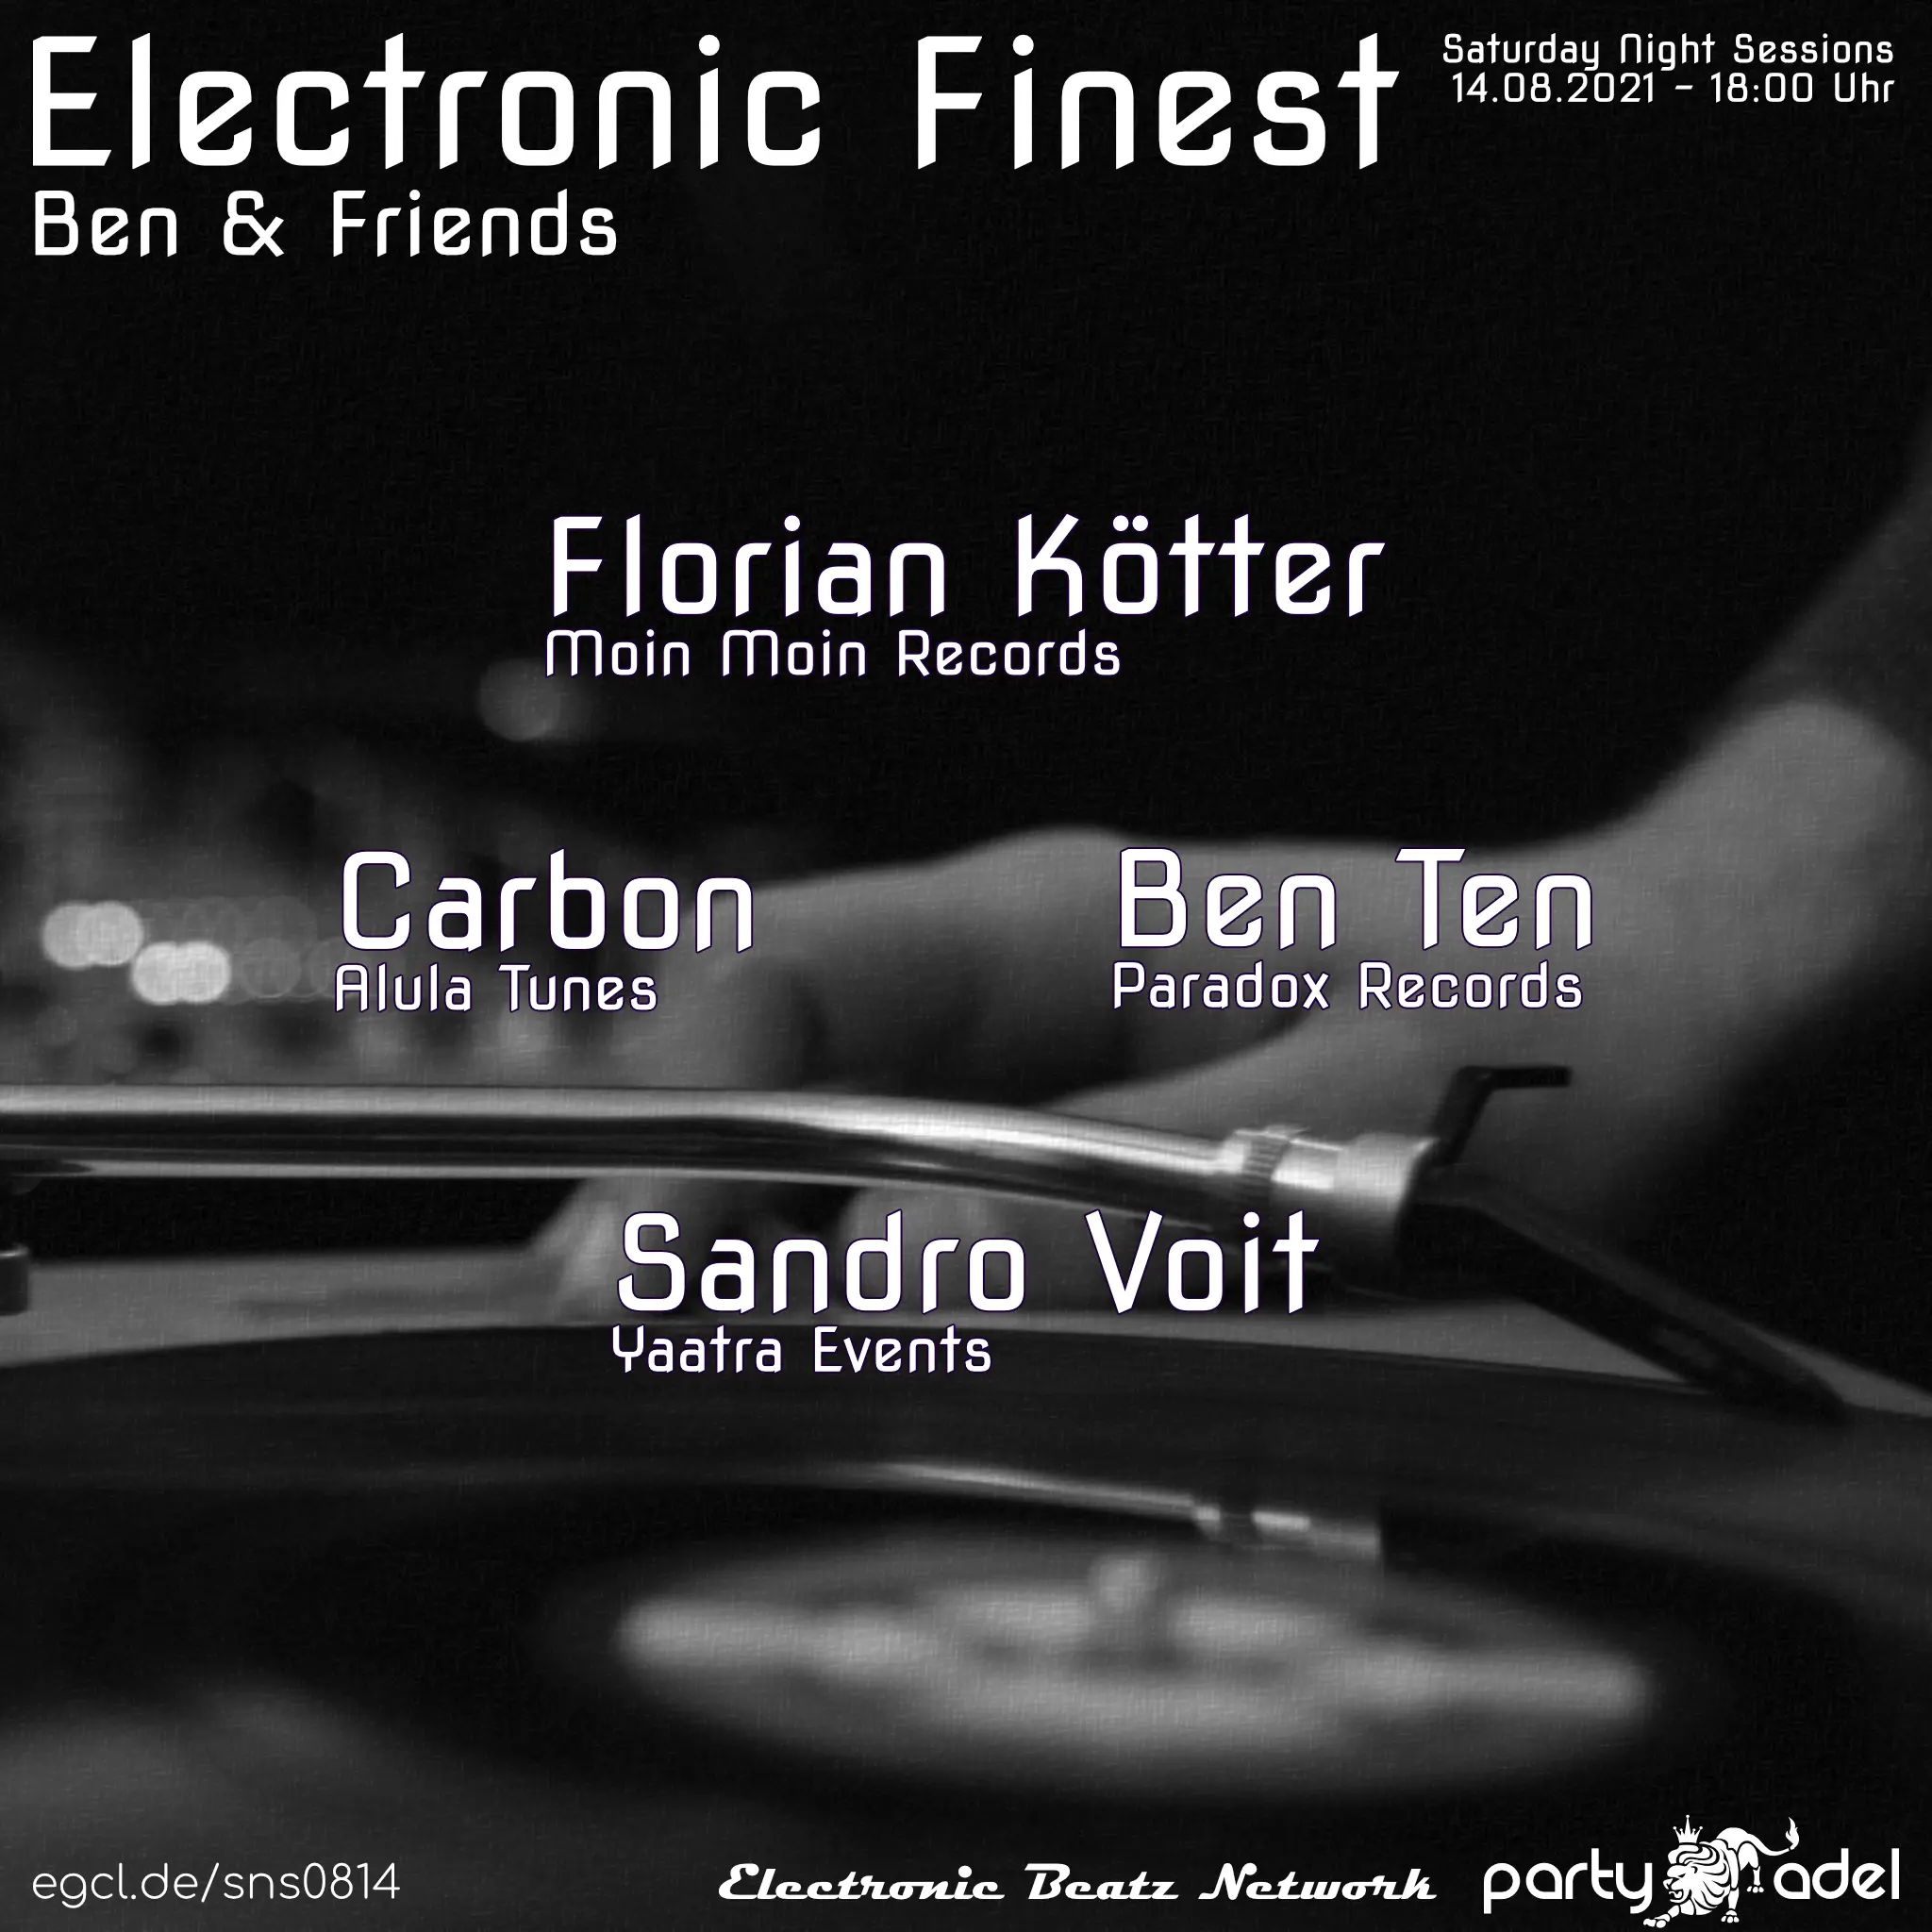  Electronic Finest (14.08.2021)